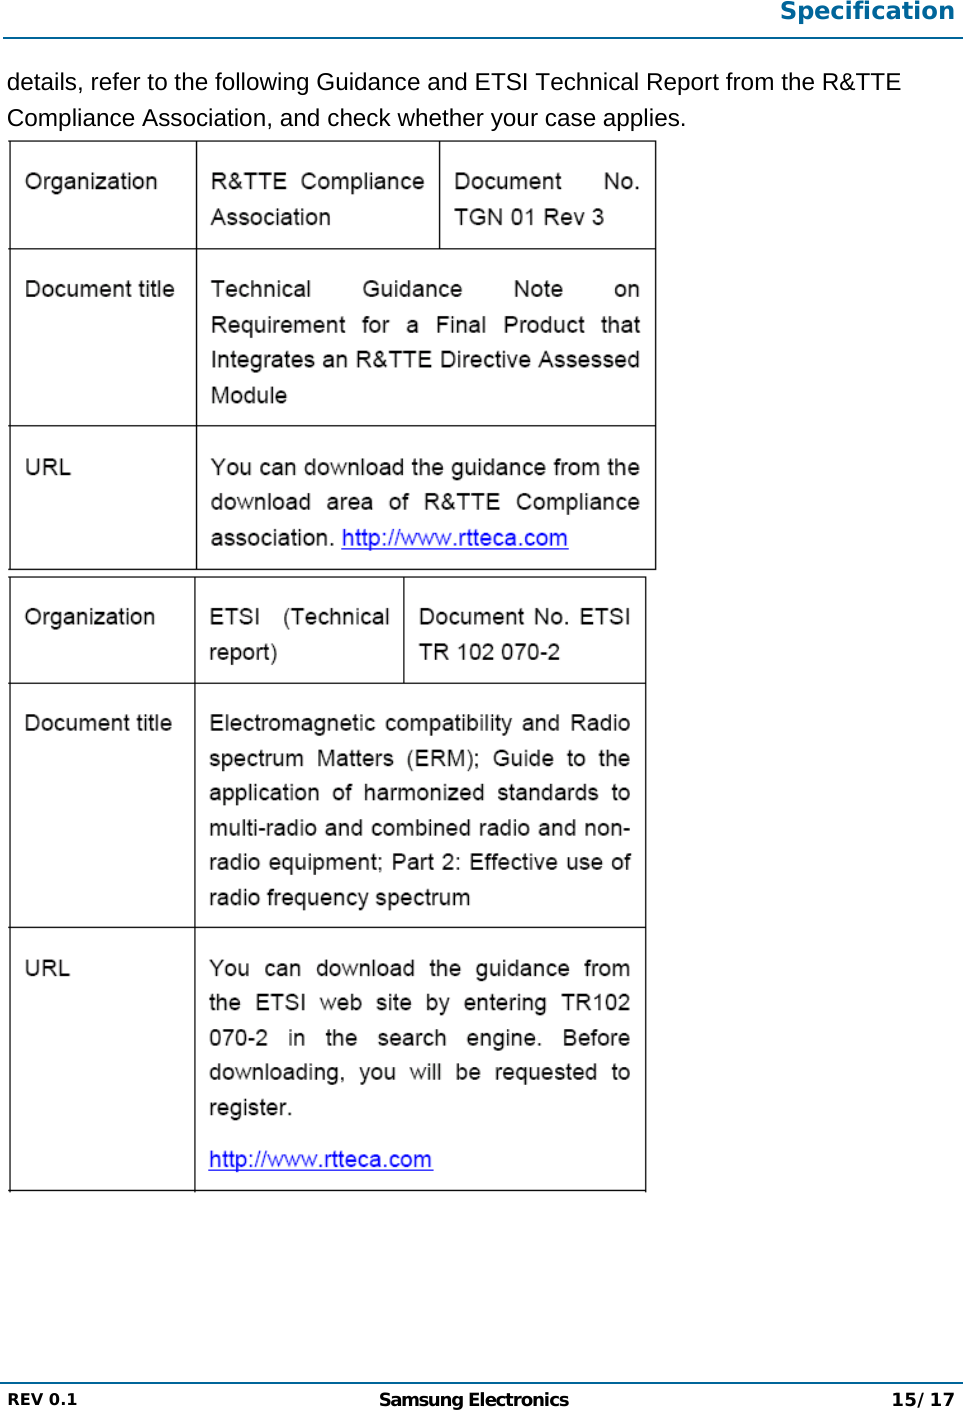  Specification  REV 0.1  Samsung Electronics 15/17  details, refer to the following Guidance and ETSI Technical Report from the R&amp;TTE Compliance Association, and check whether your case applies.   